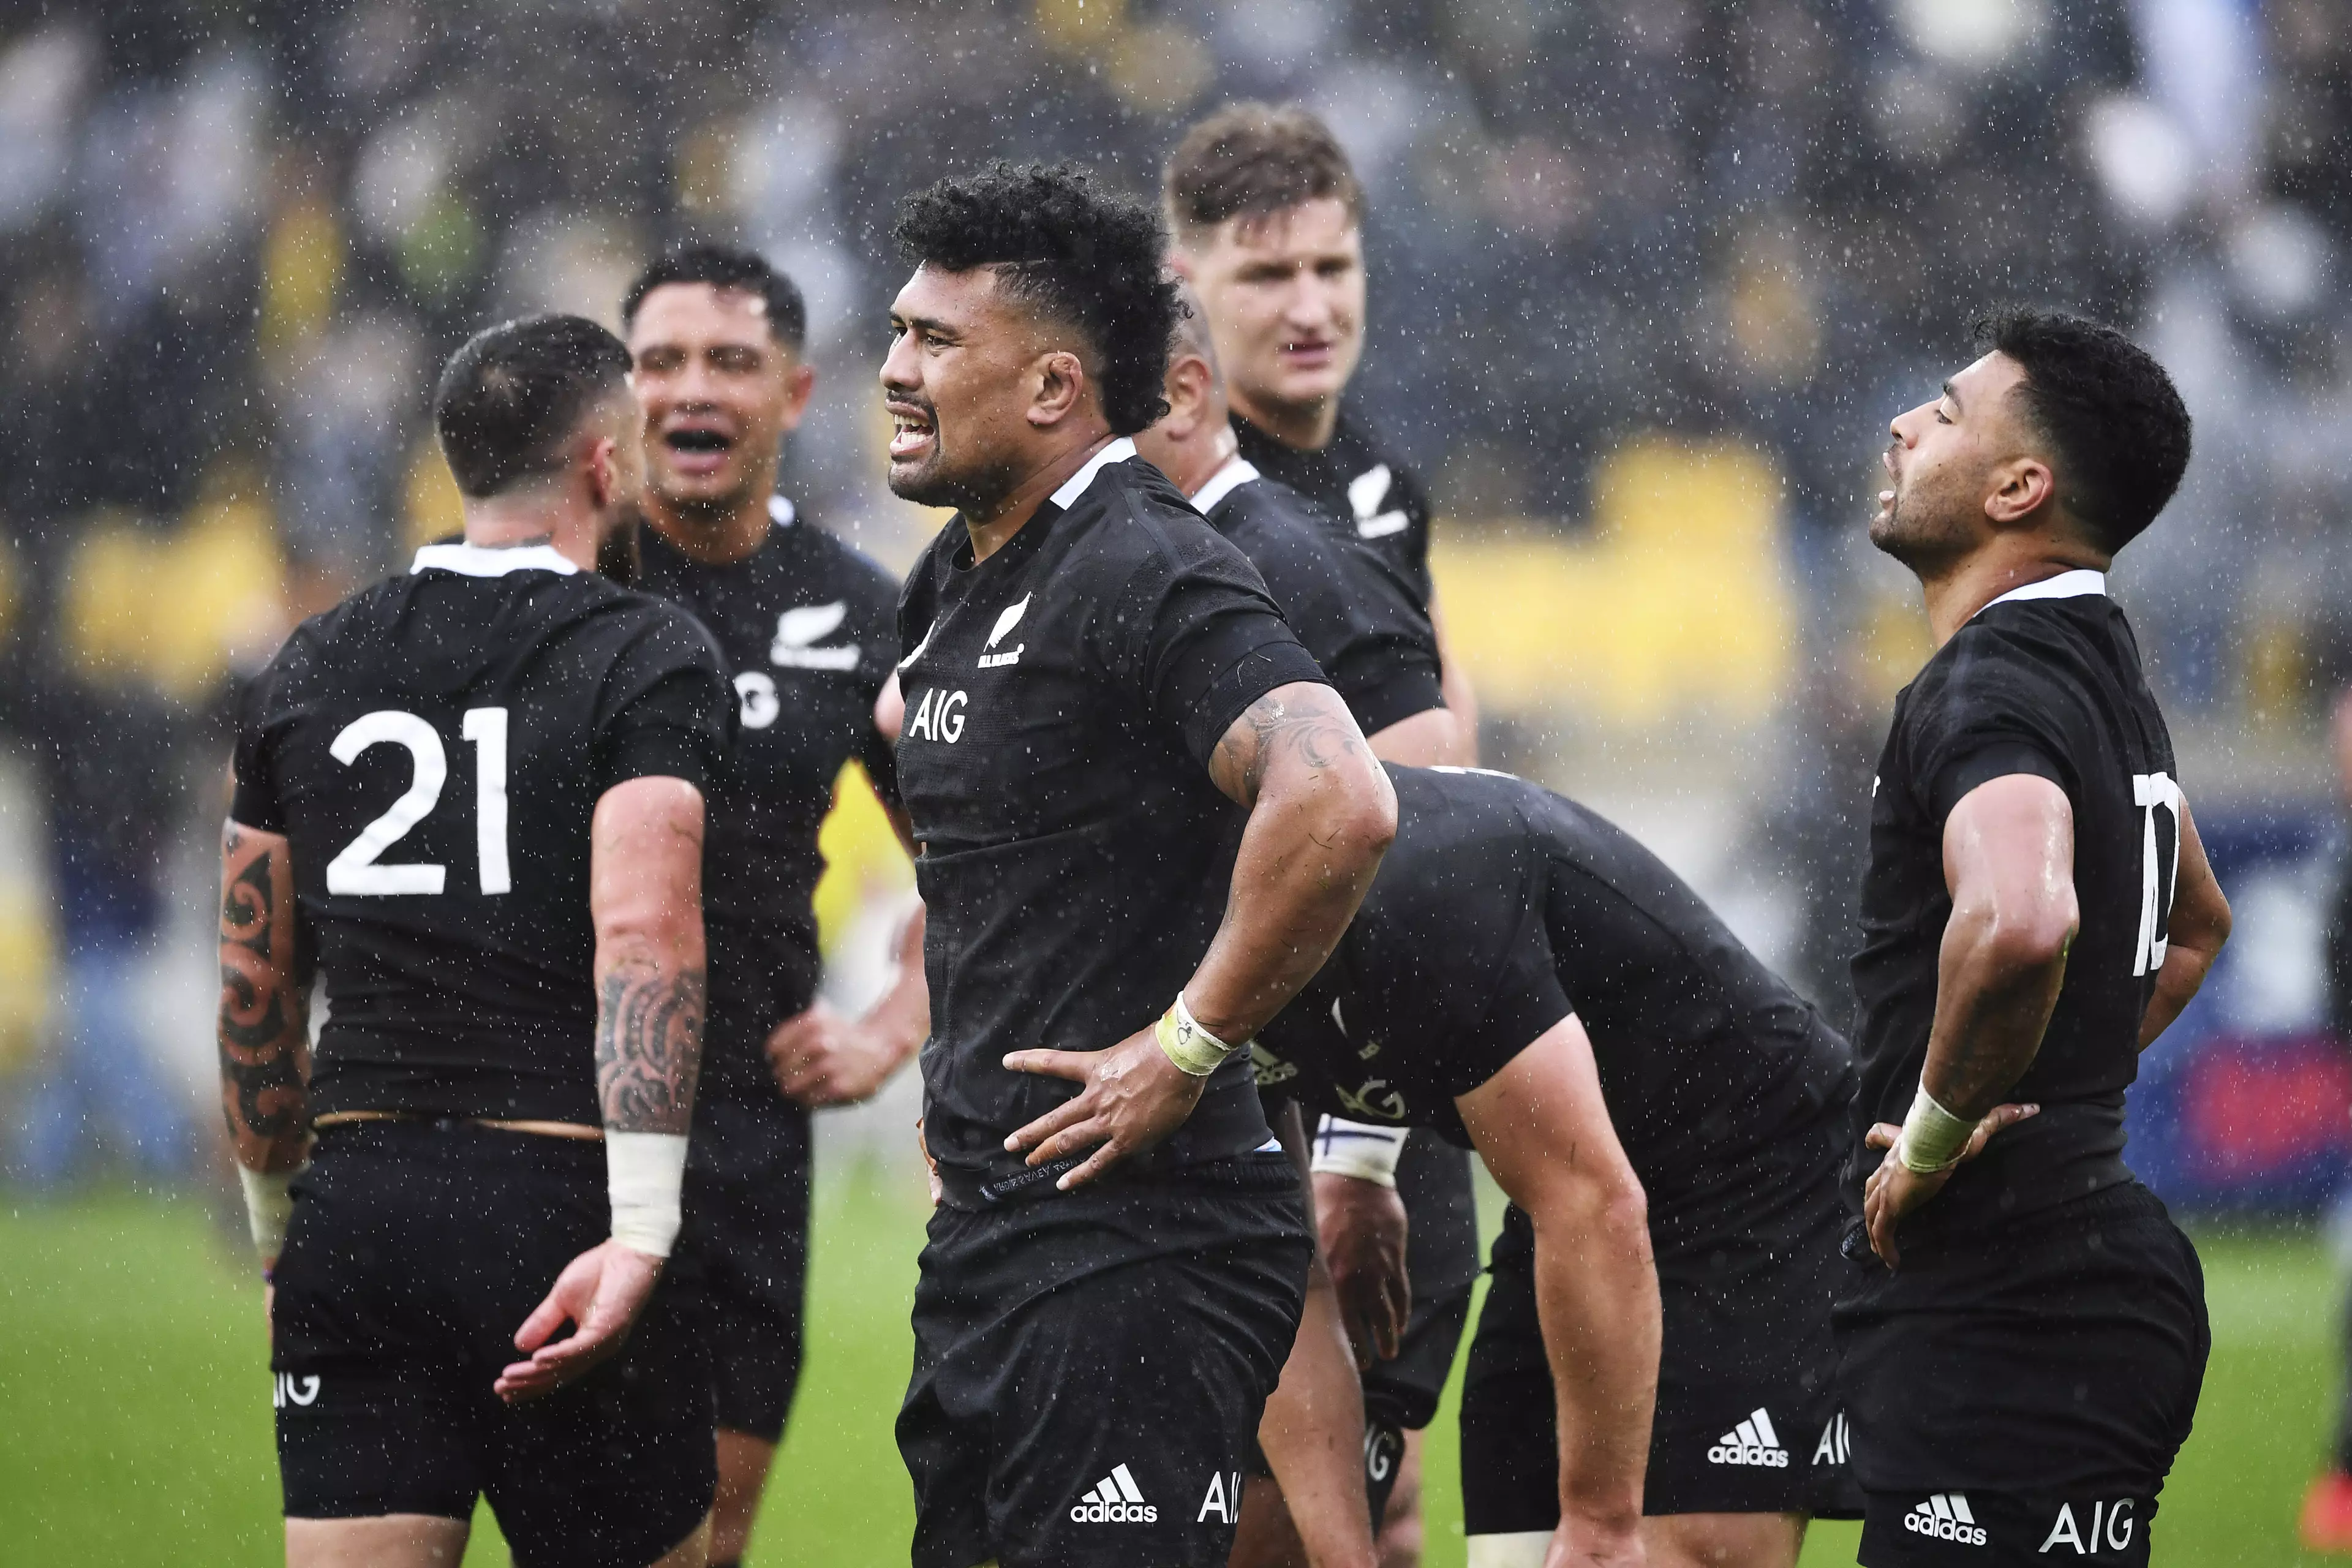 The All Blacks could breathe a sigh of relief.